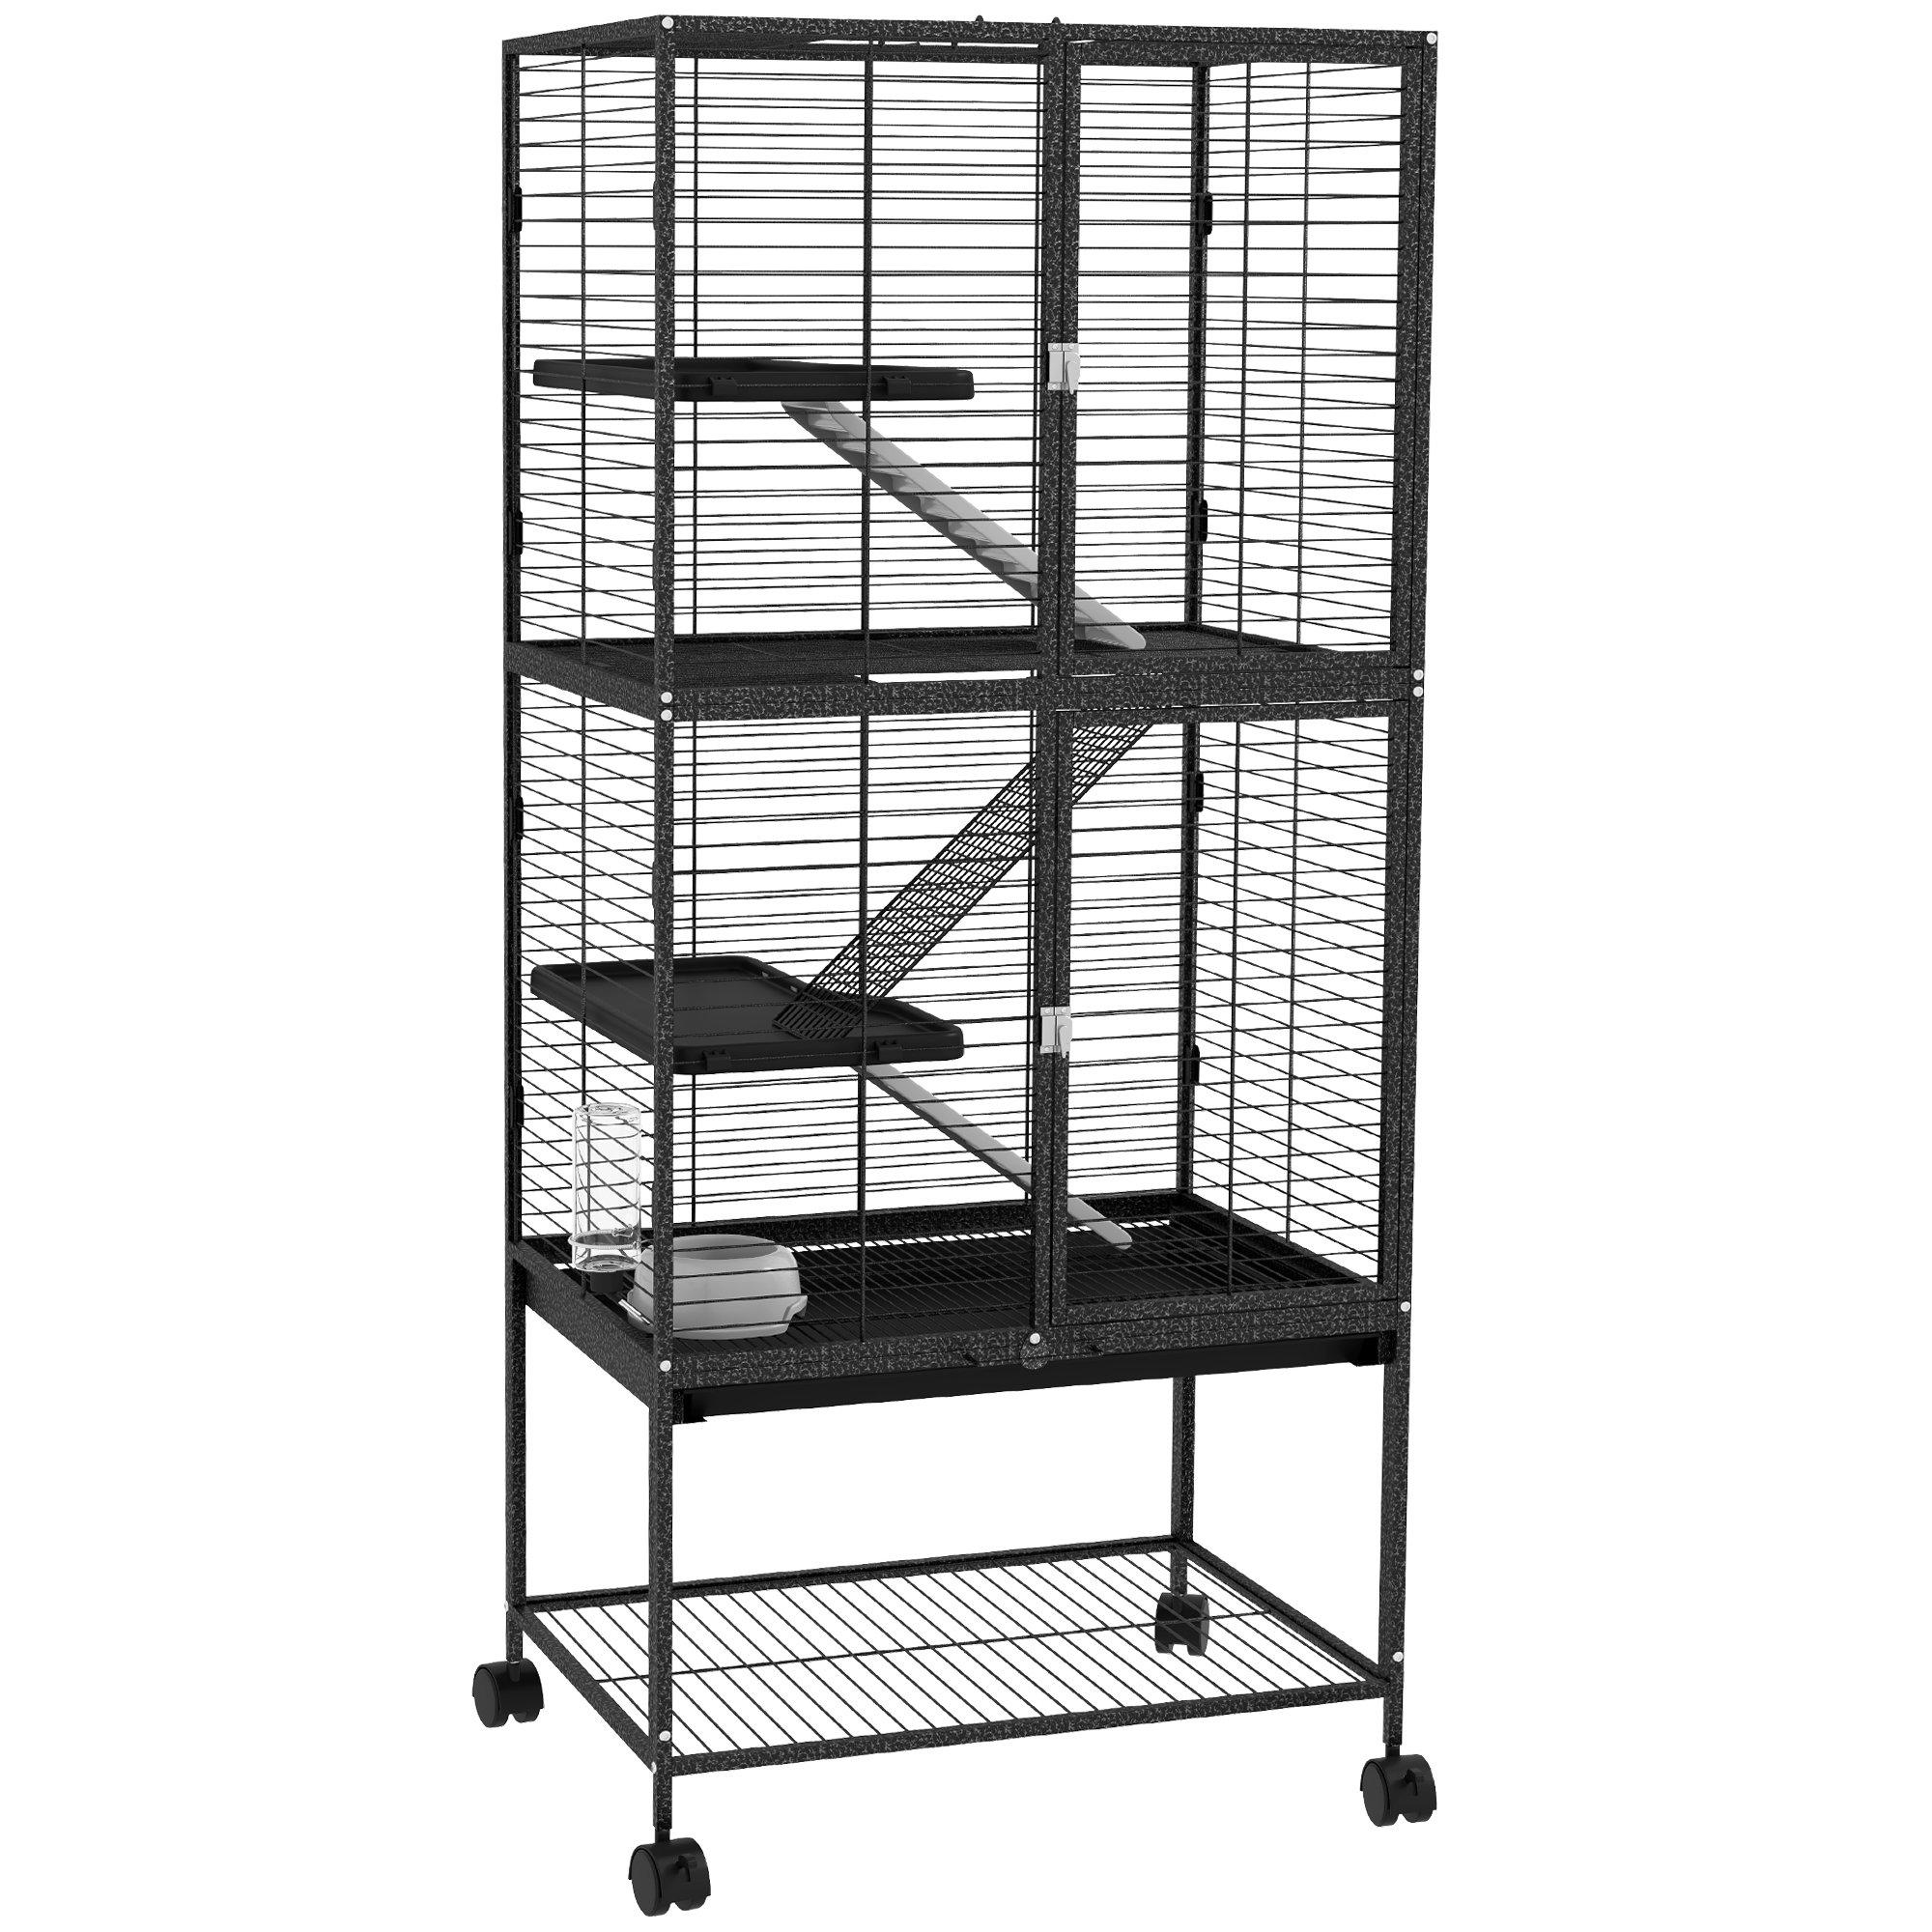 136cm Ferret Cage Rolling Small Animal Cage for Chinchillas, Squirrels w/ Tray